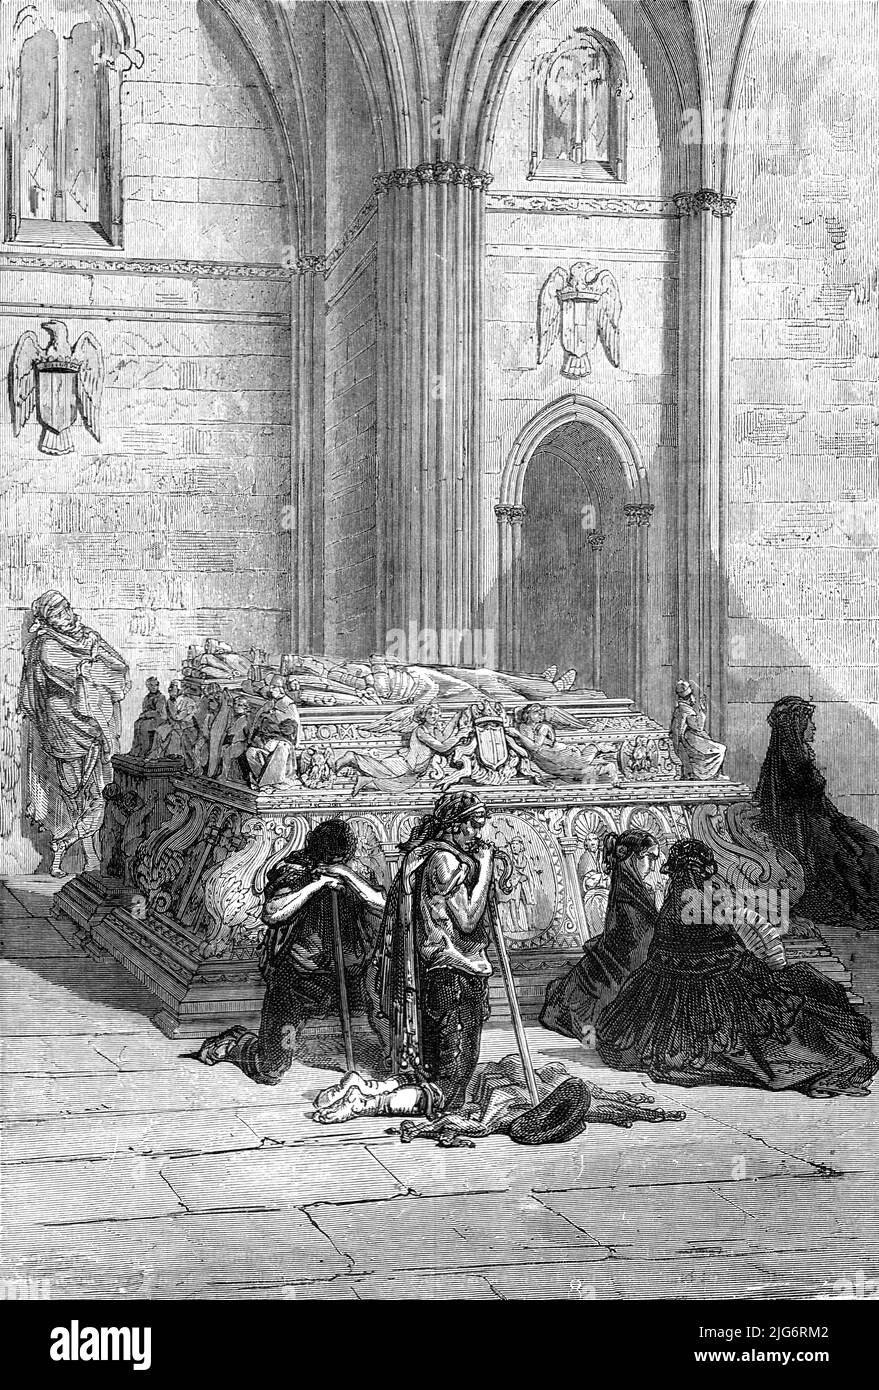 'Tomb of Ferdinand and Isabella in the Cathedral, Granada; An Autumn Tour in Andalusia', 1875. [Pilgrims at the Tomb of the Catholic Monarchs - Ferdinand II and Isabella of Castile - in the Royal Chapel of Granada, Spain]. From, 'Illustrated Travels' by H.W. Bates. [Cassell, Petter, and Galpin, c1880, London] Belle Sauvage Works.London E.C. Stock Photo